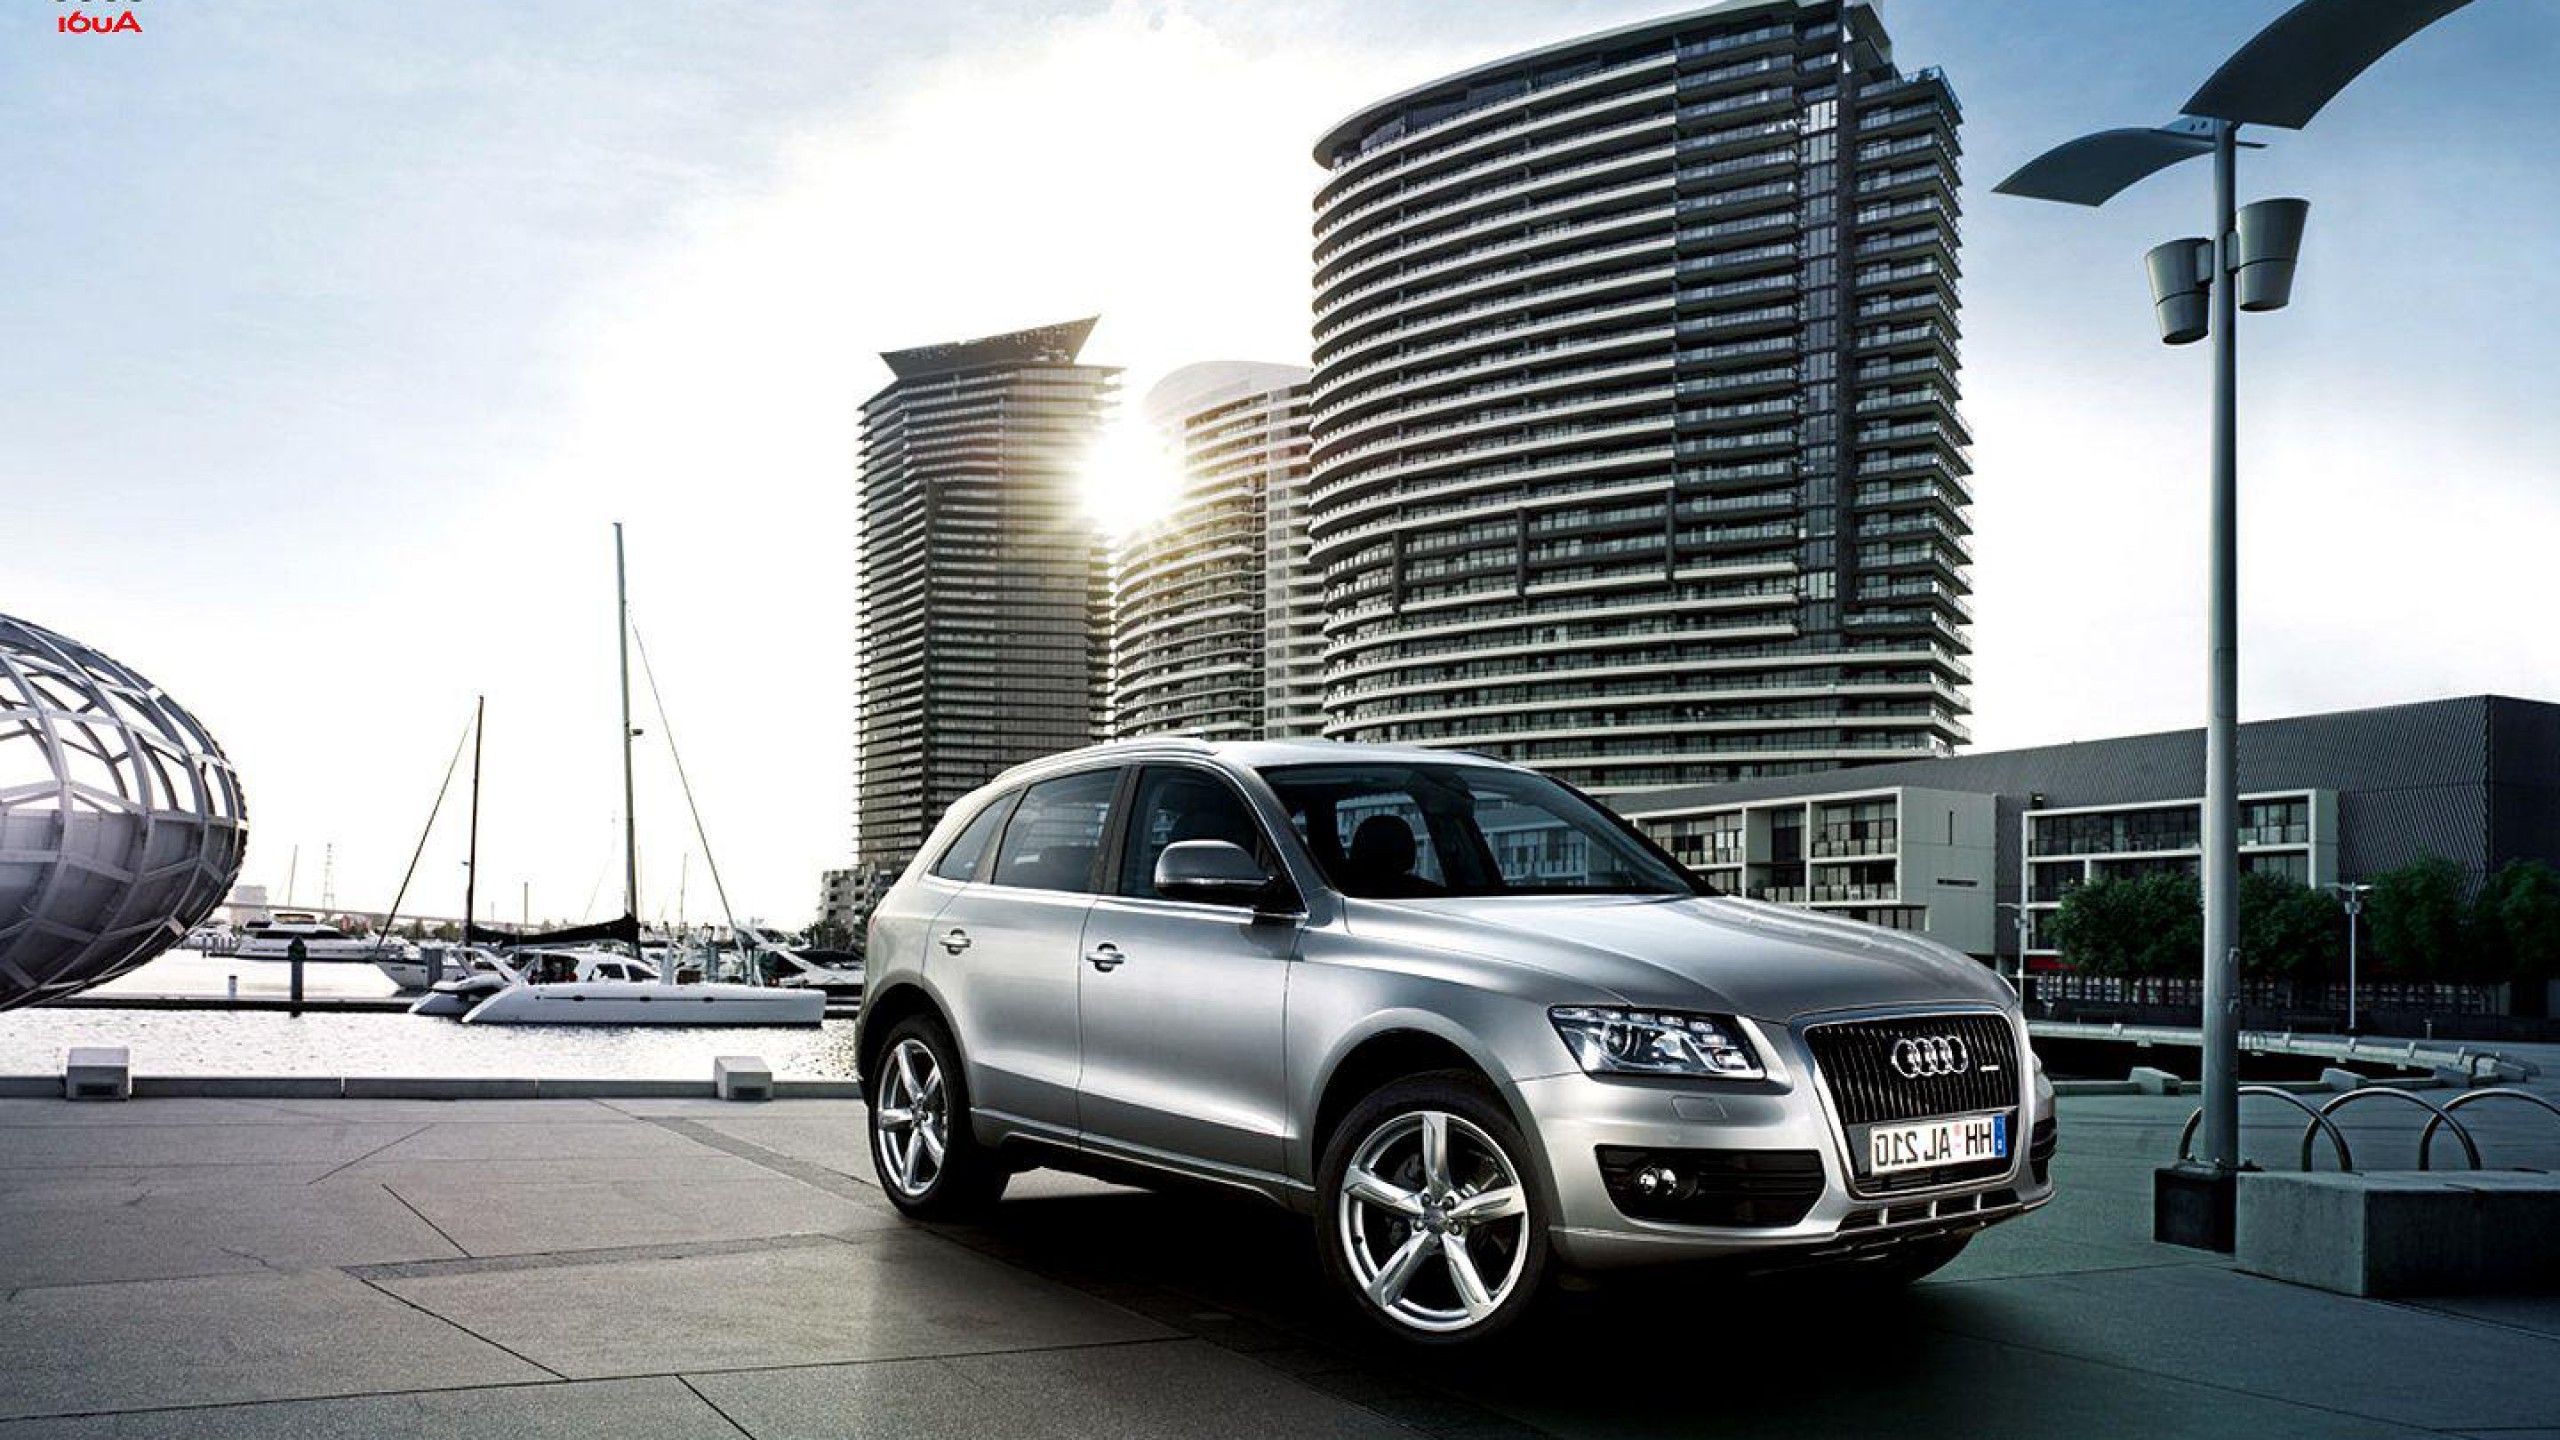 2560x1440 300 best Audi Wallpapers images on Pinterest | Car wallpapers, Audi q3 and  Cars